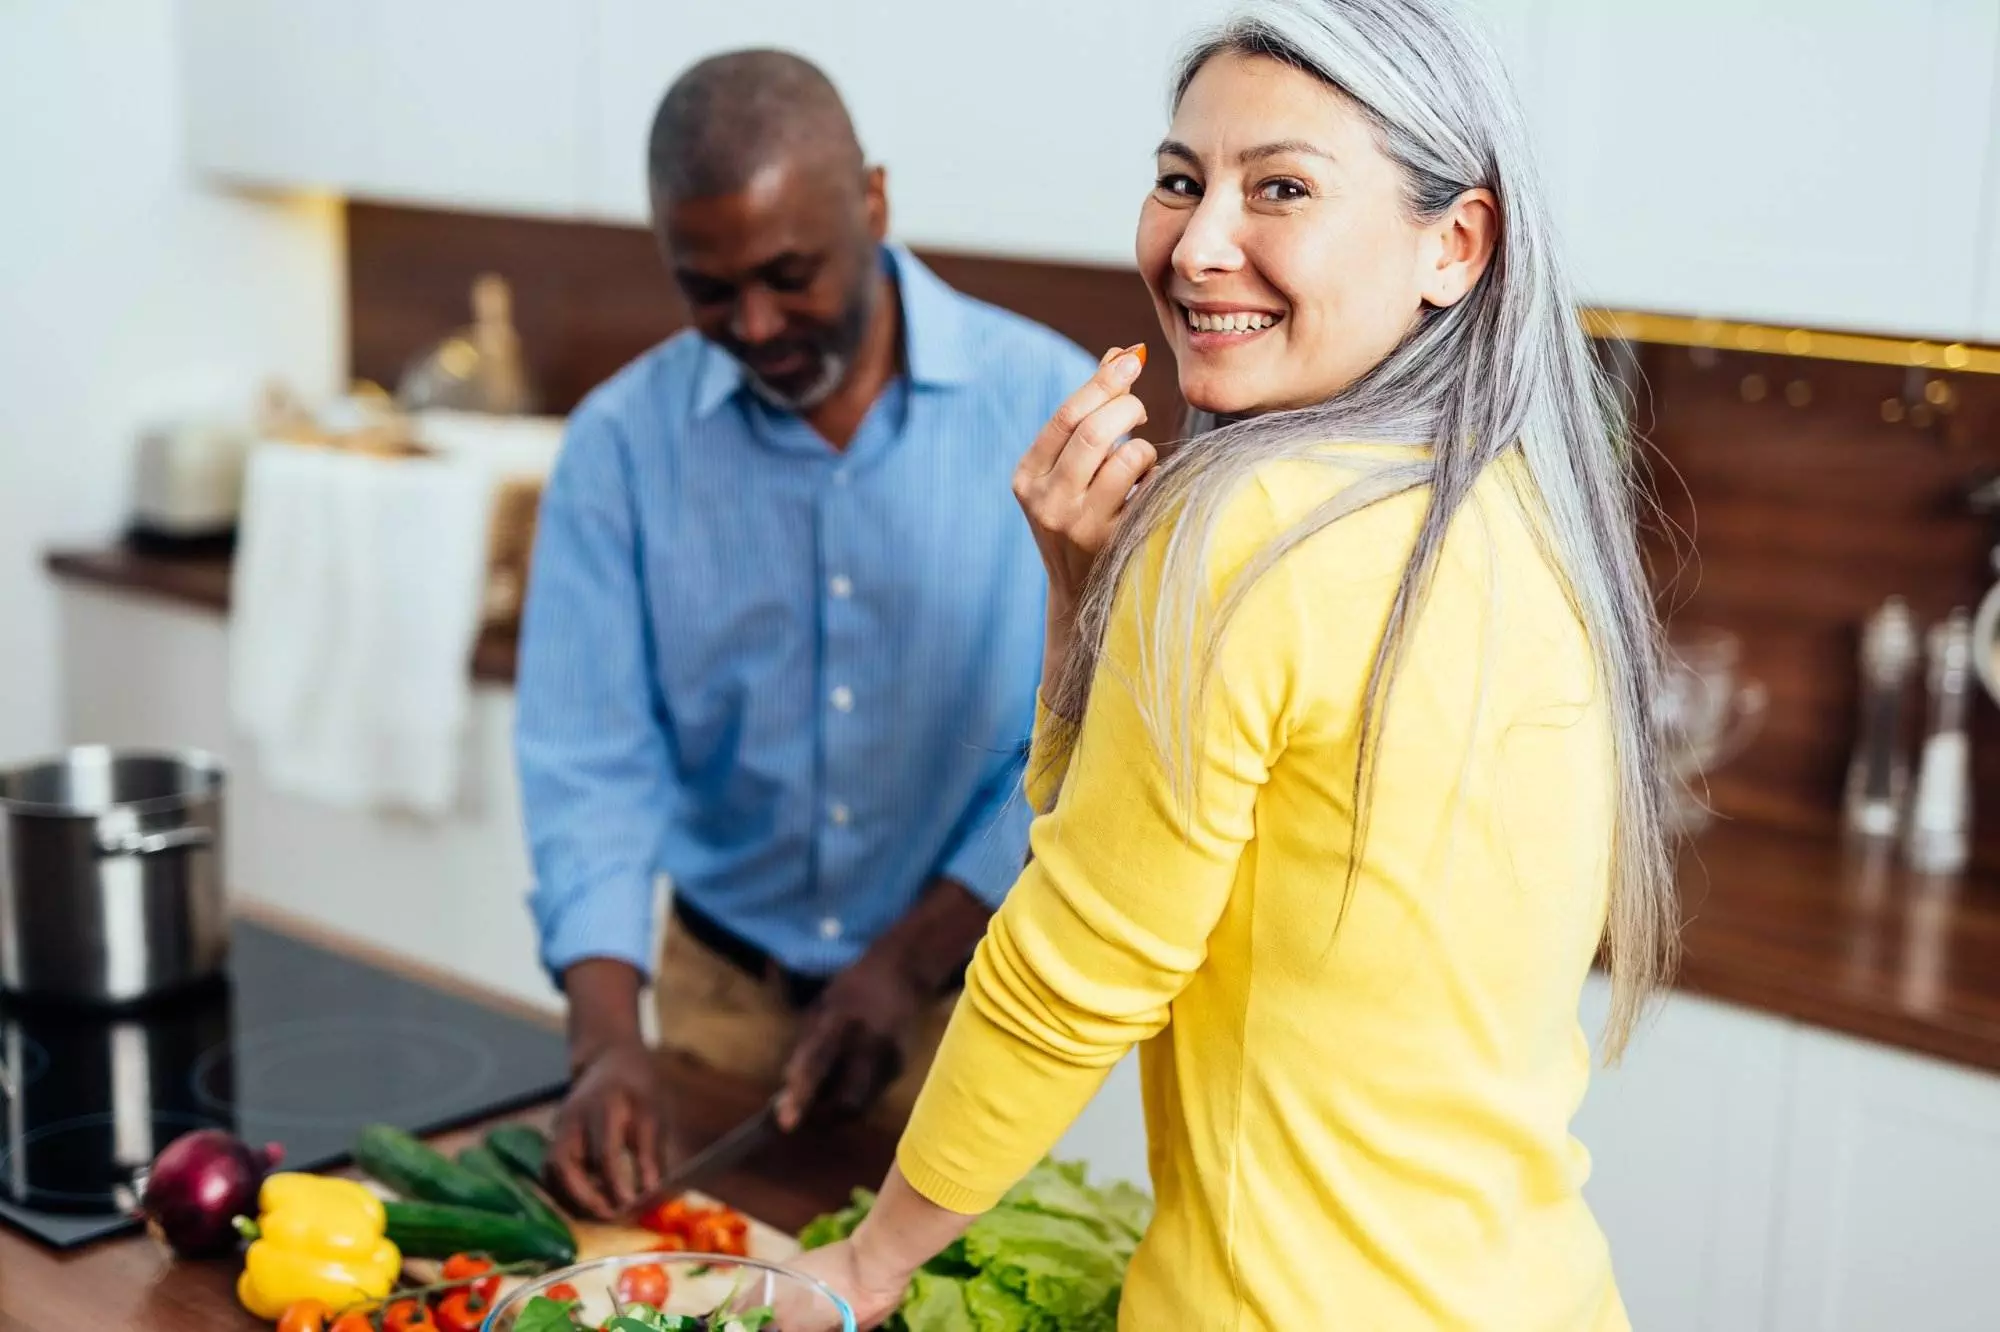 Couple preparing salad in kitchen together. Ketogenic healthy lifestyle